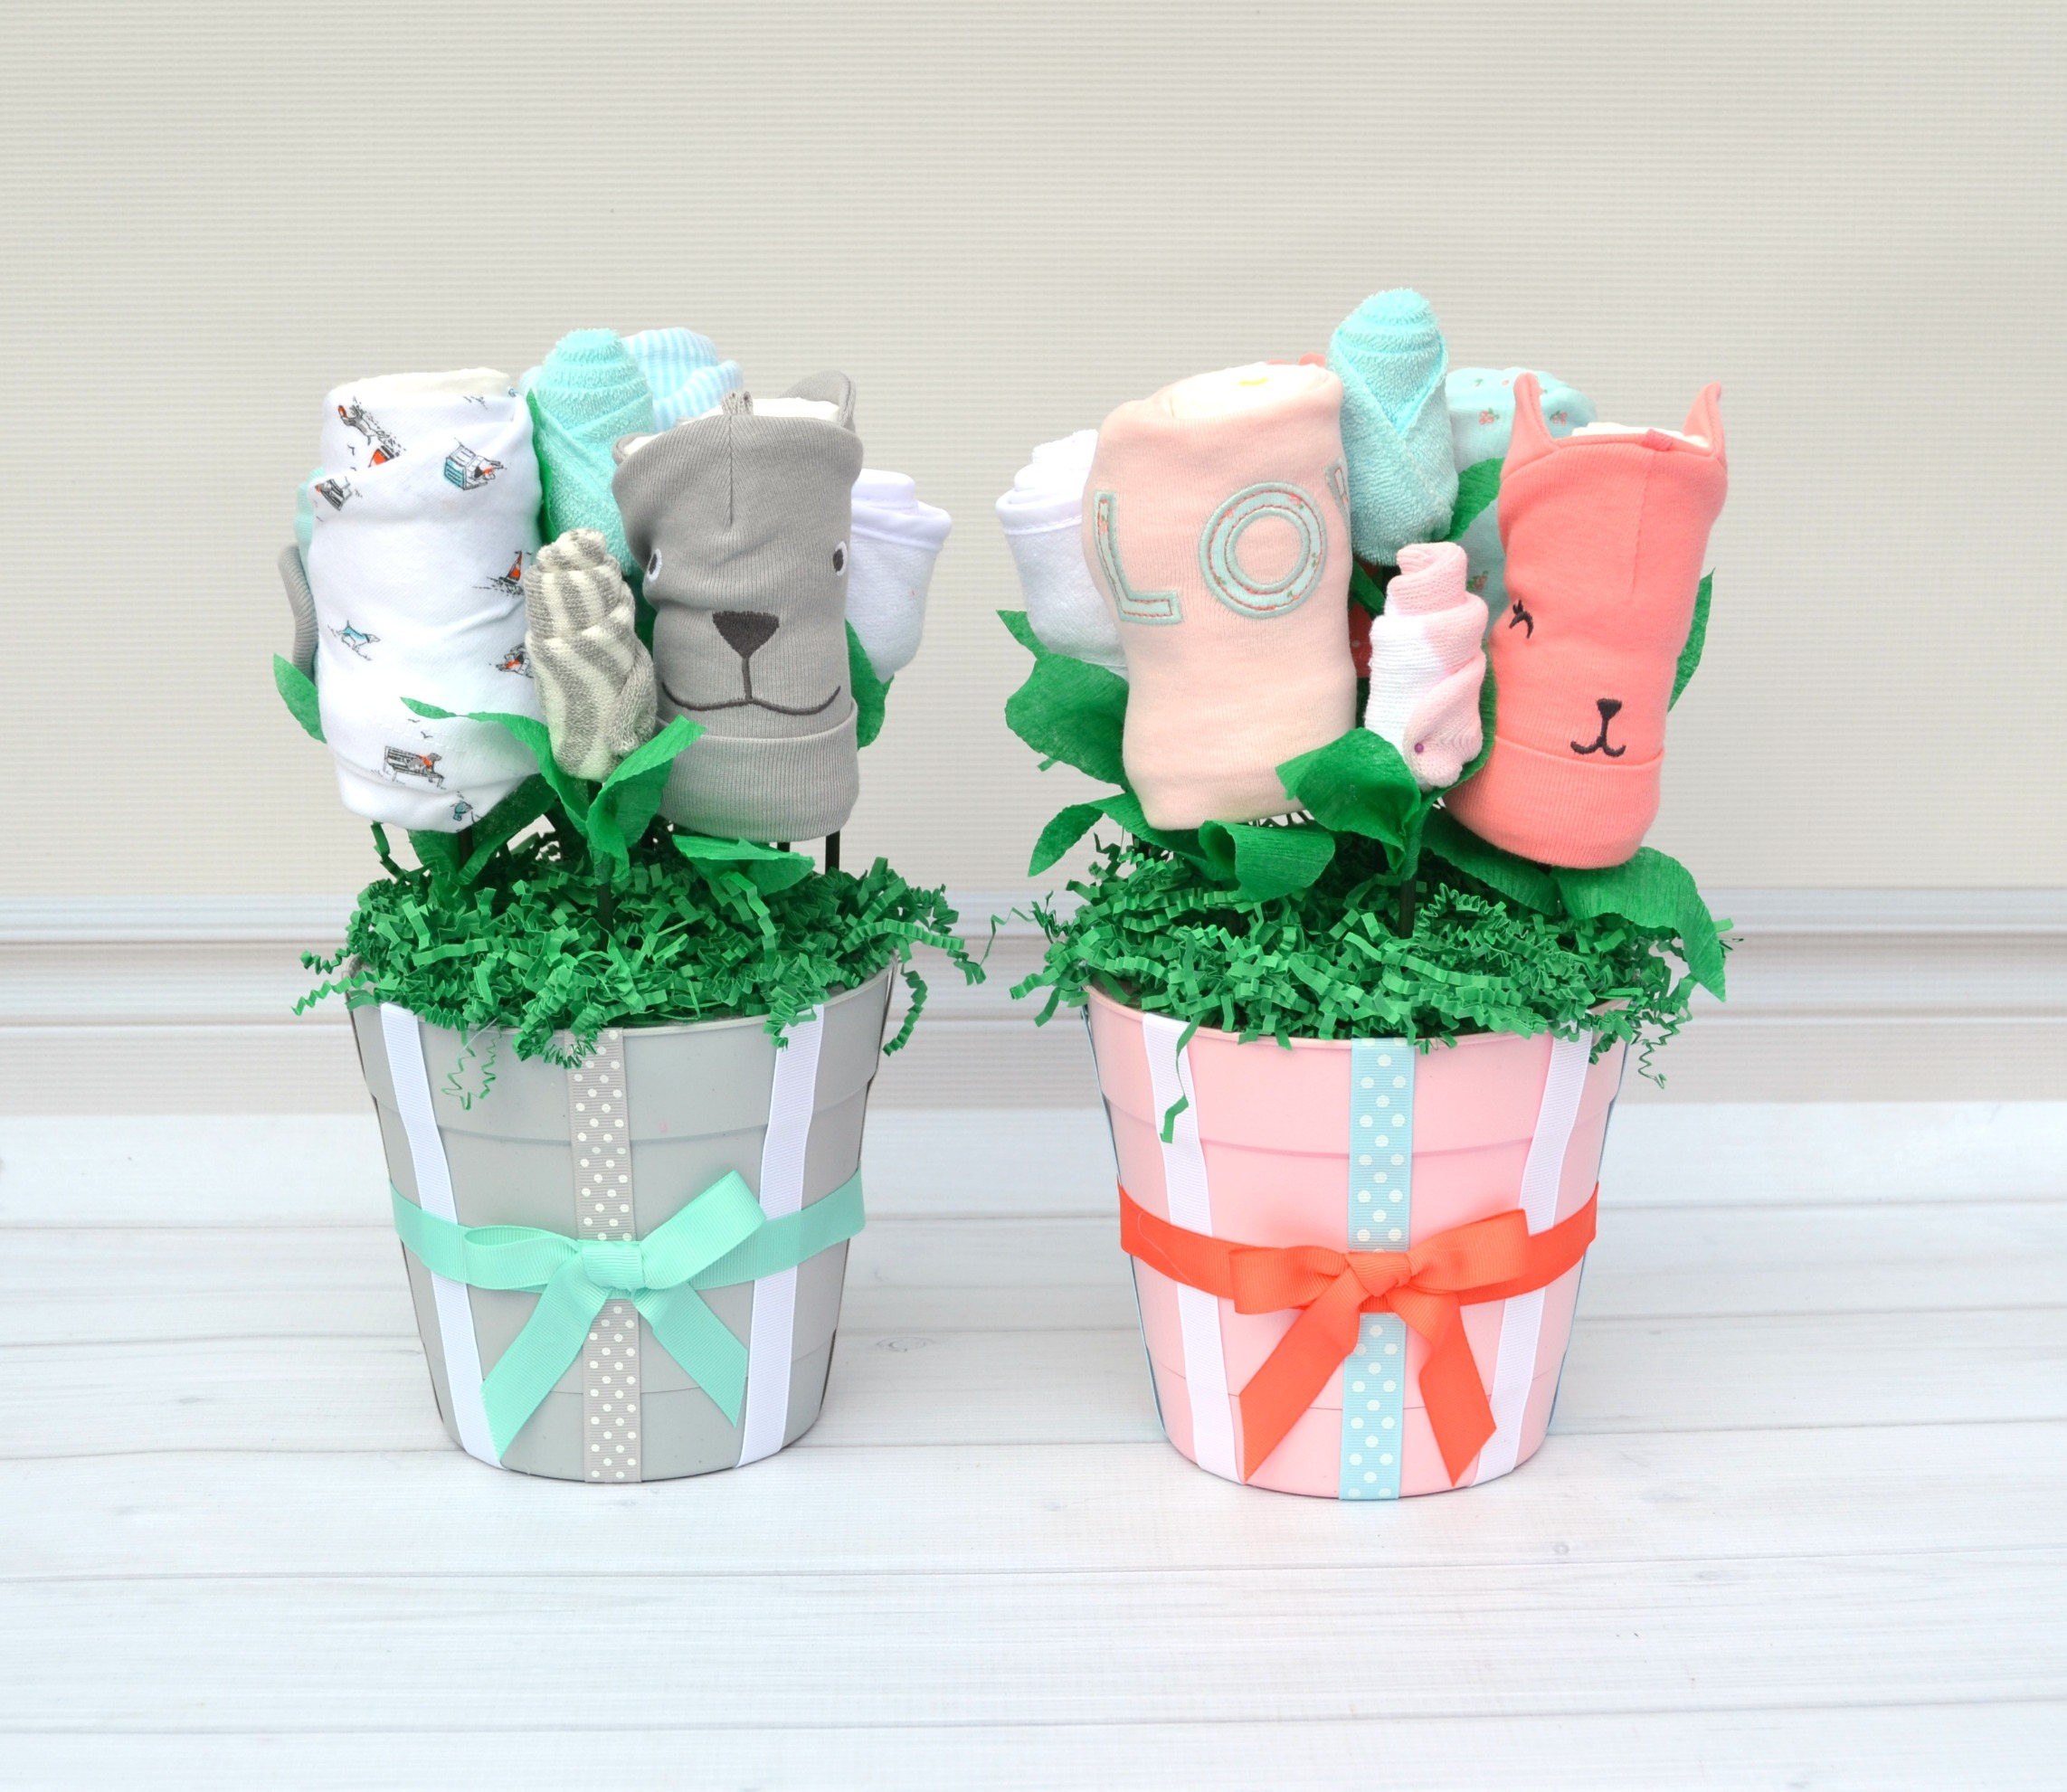 Baby Girl Twins Gifts
 Girl Boy Twin Gifts Baby Gift for Boy Girl Twins Newborn